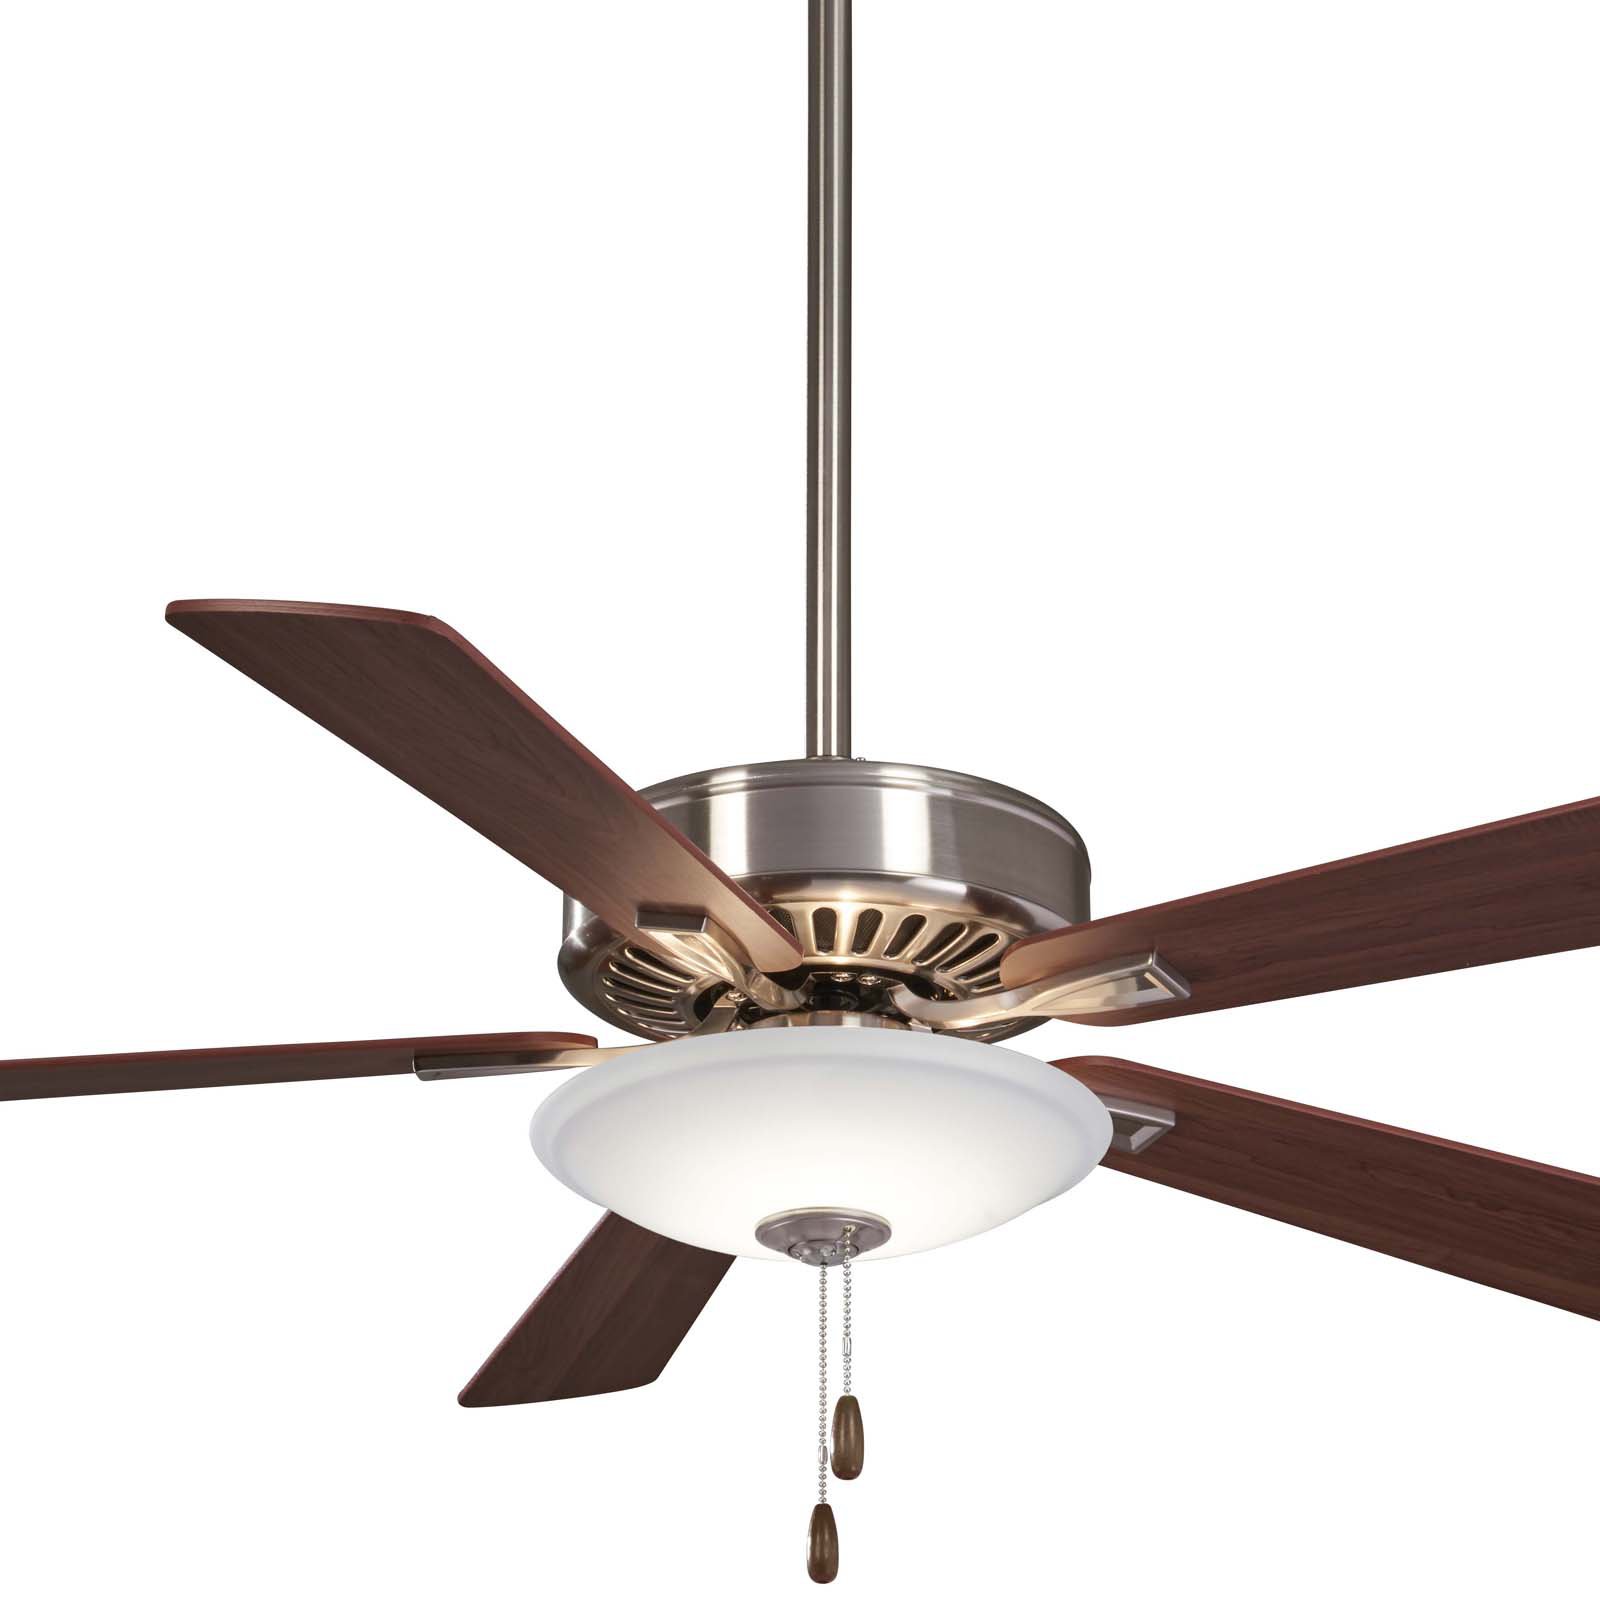 Minka-Aire F656L-PN Contractor Uni-Pack 52 Inch LED Pull Chain Ceiling Fan in Polished Nickel Finish - 2